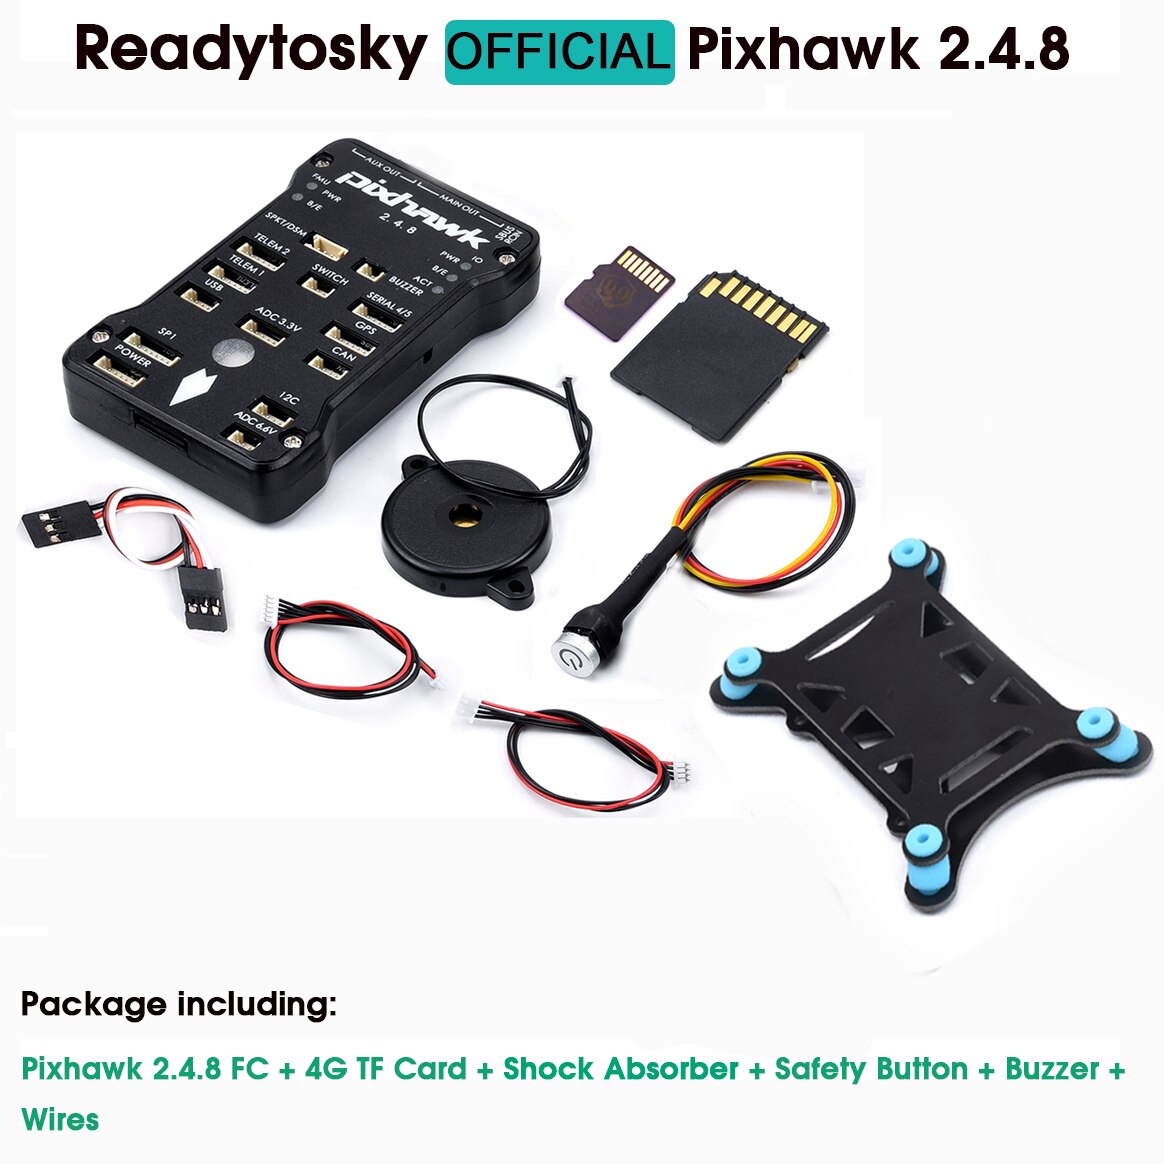 package includes: Pixhawk 2.4.8 + 4G TF Card + Shock Absorb